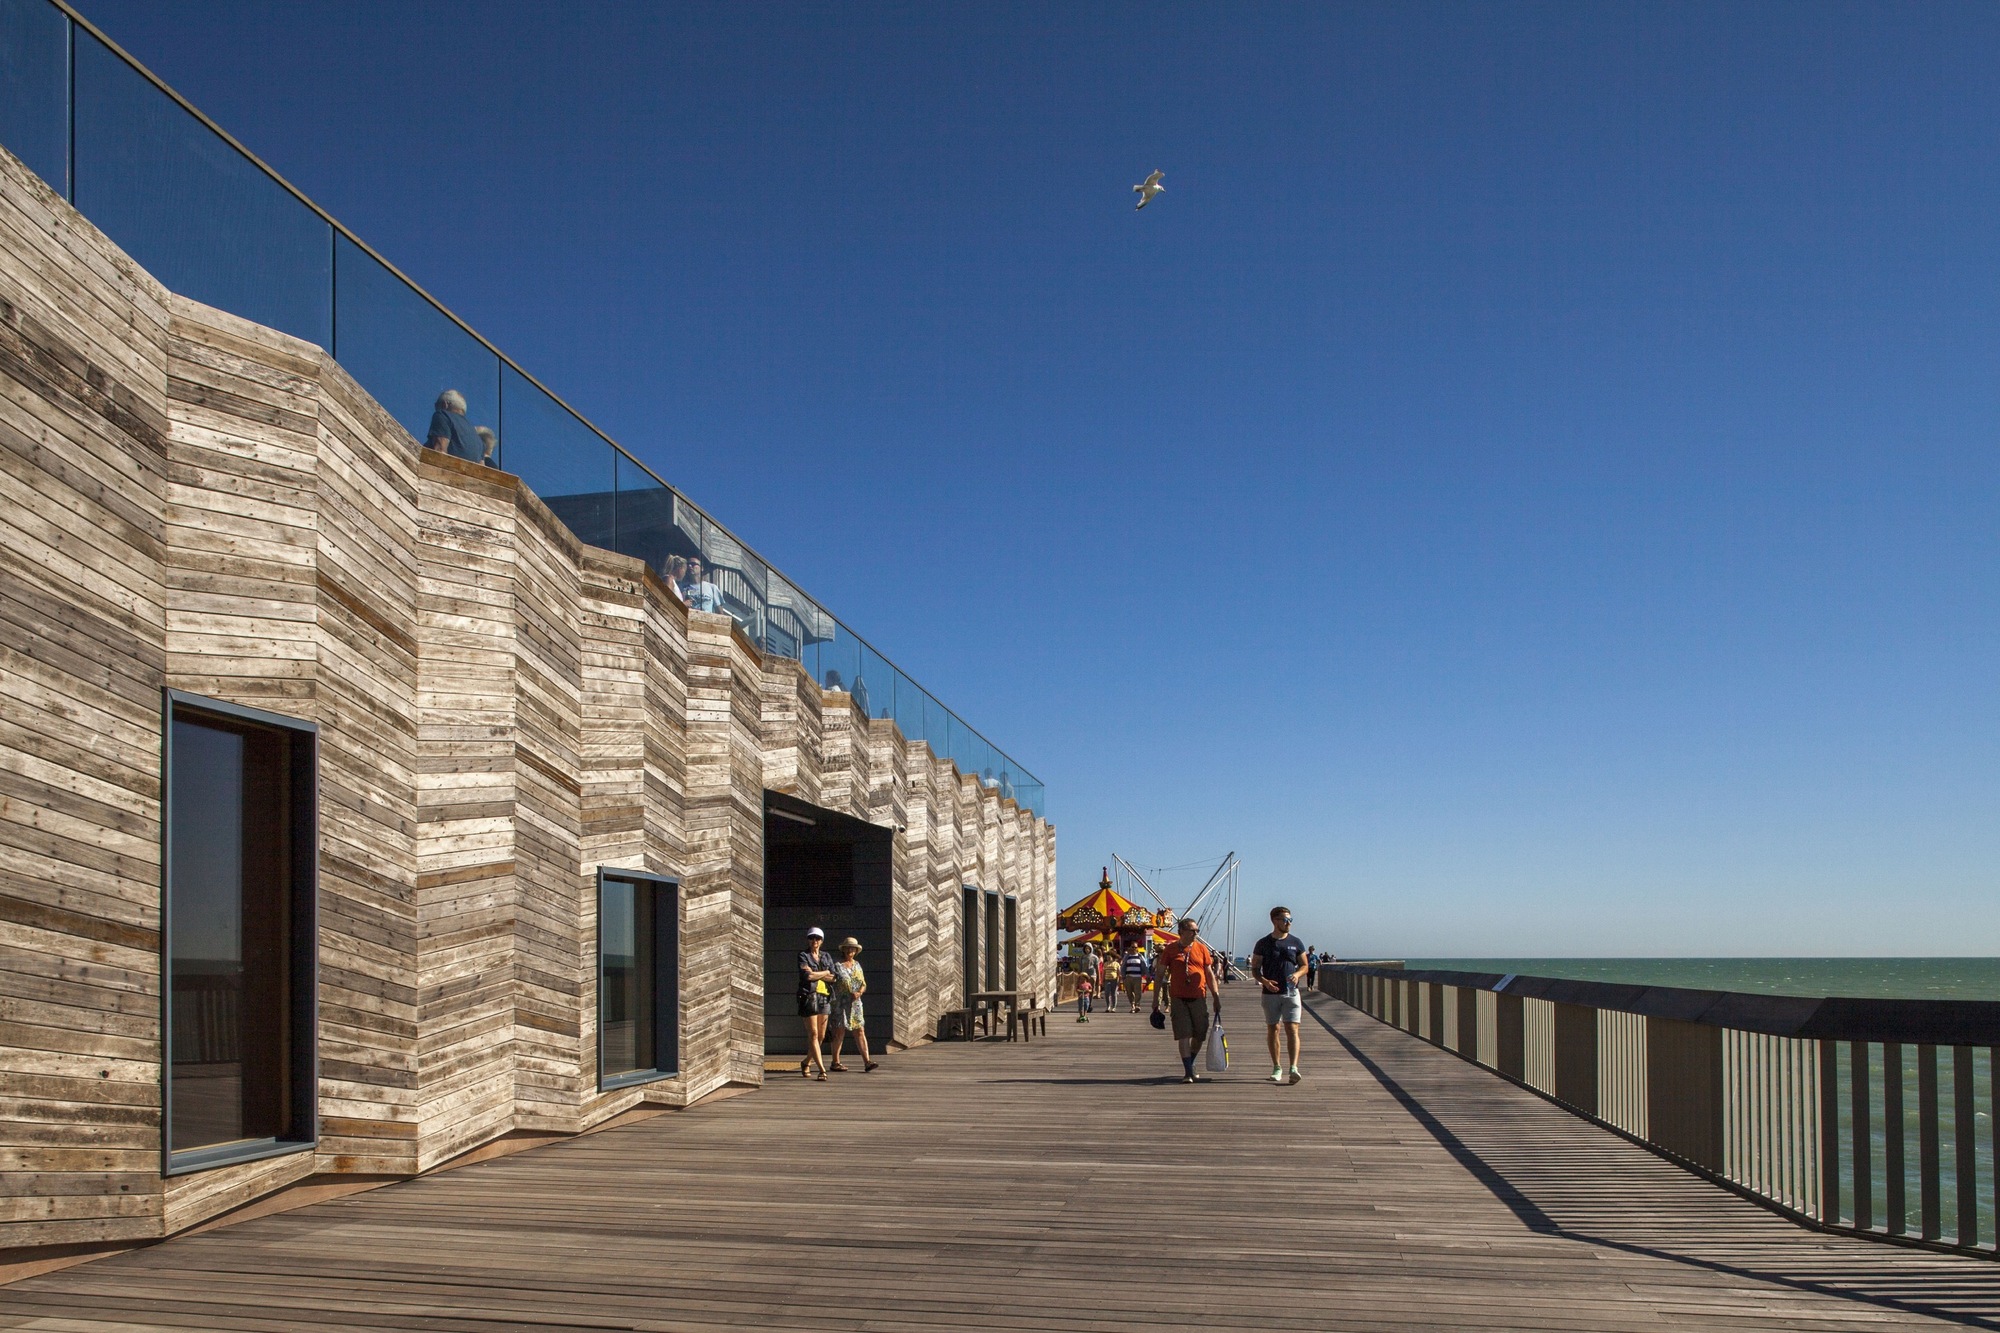 dRMM's Hastings Pier Wins 2017 RIBA Stirling Prize | ArchDaily